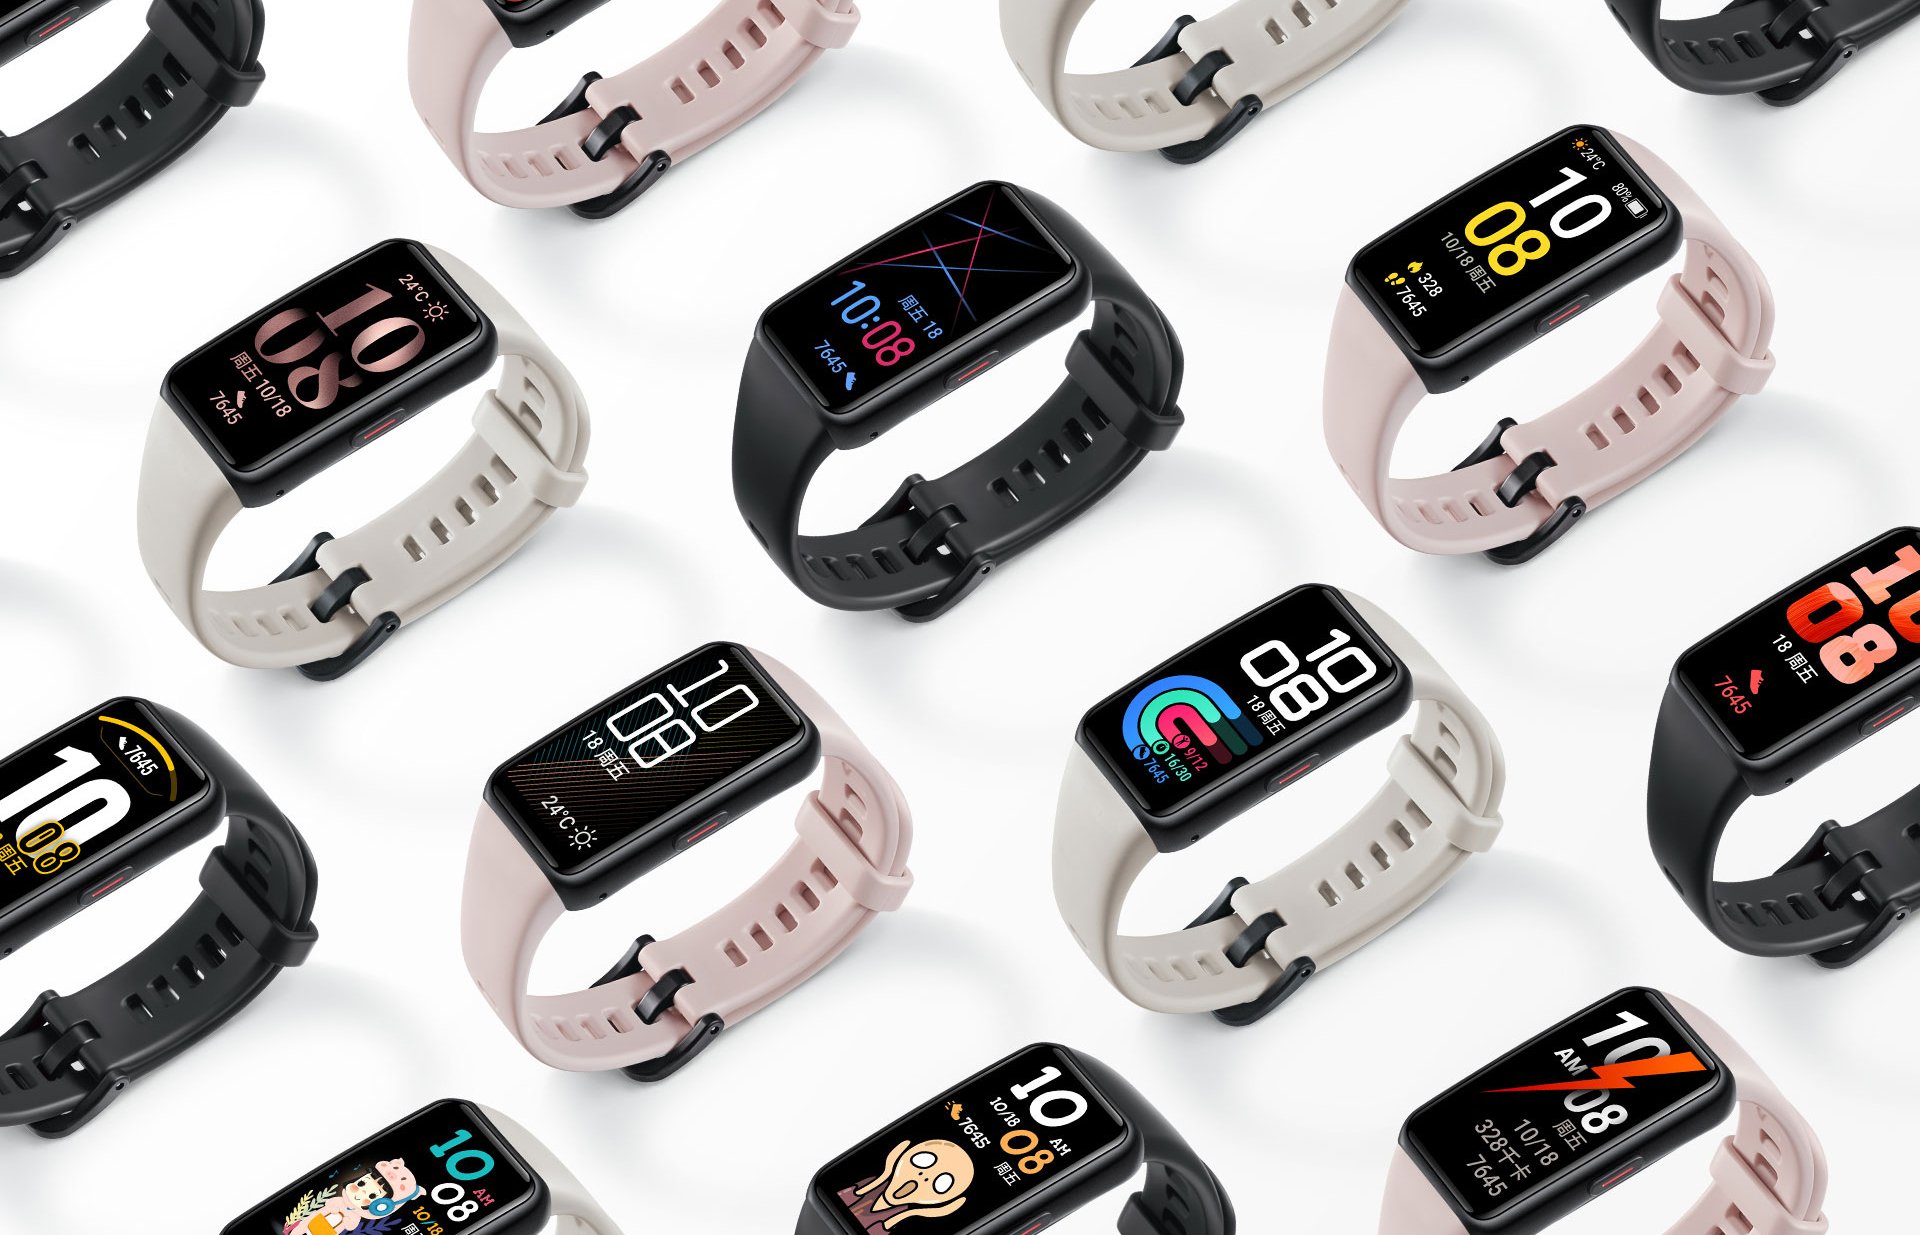 HONOR Band 6 launched as the world’s first full-screen fitness tracker